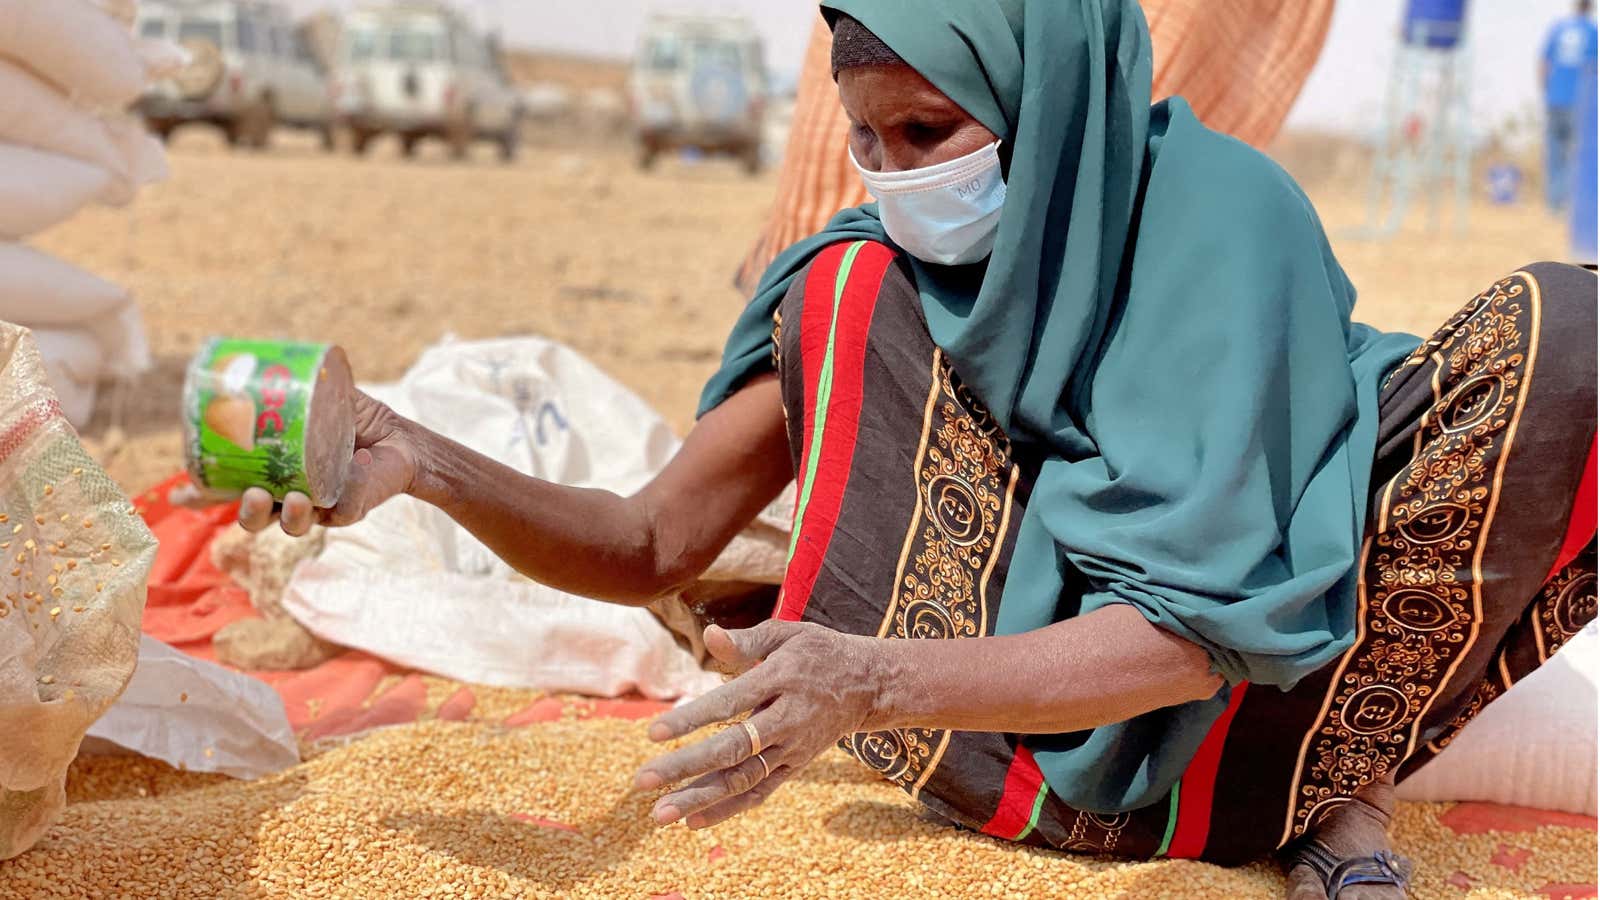 A woman collects grain at a camp for IDPs in the Somali region, Ethiopia.